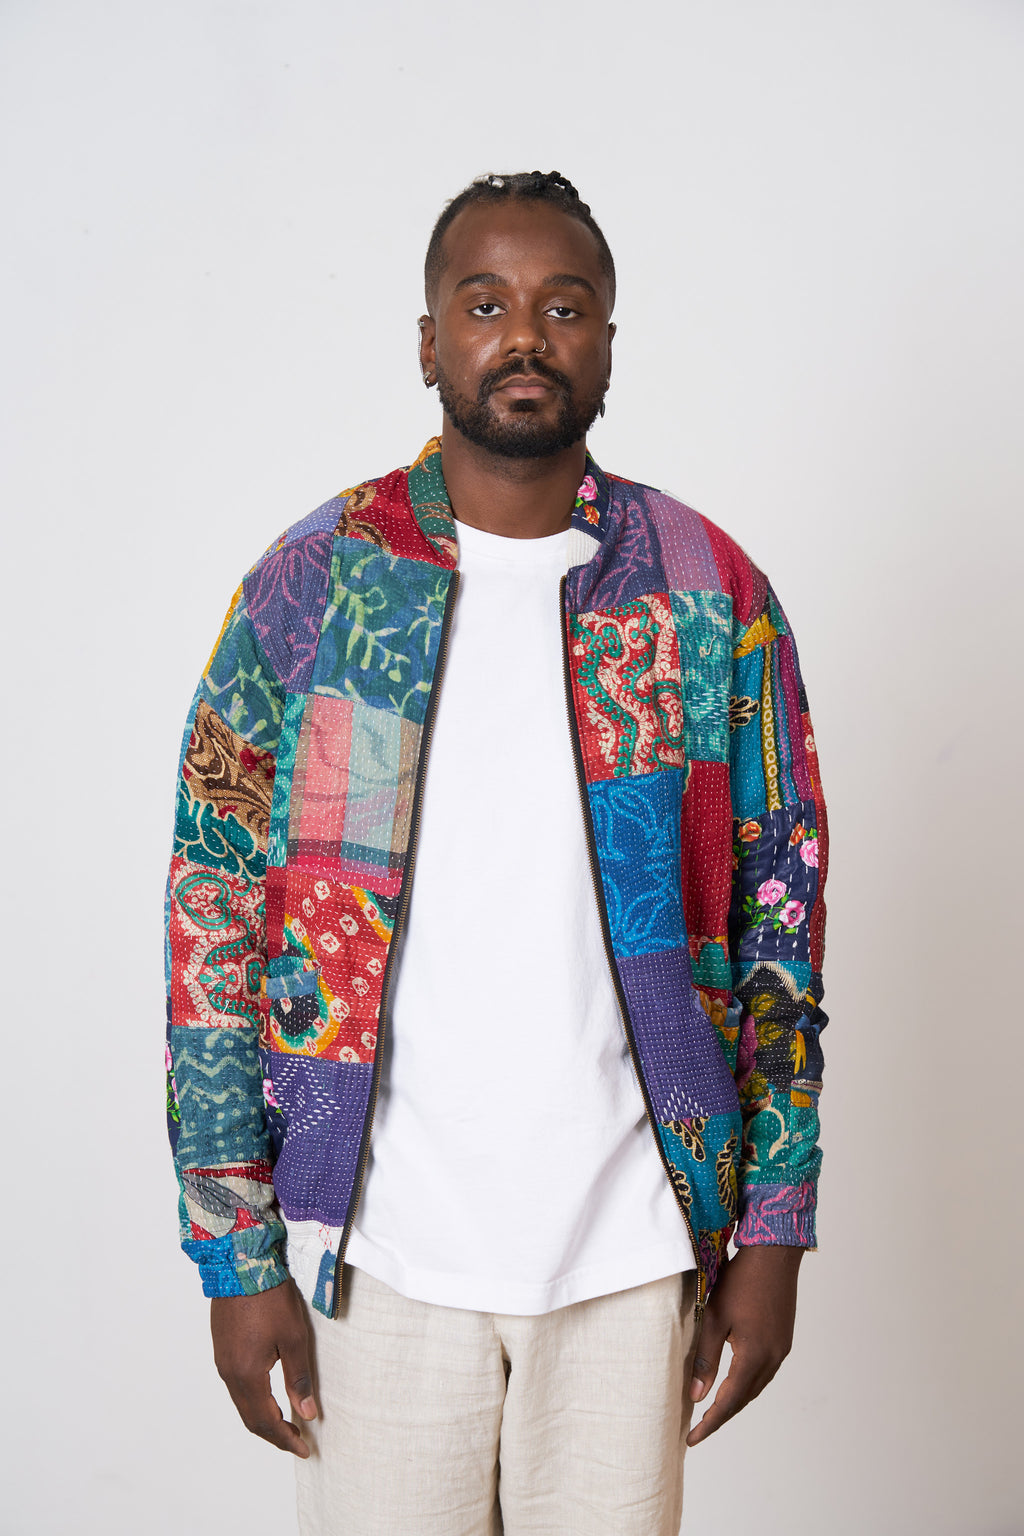 One of a Kind Quilt Bomber Jacket